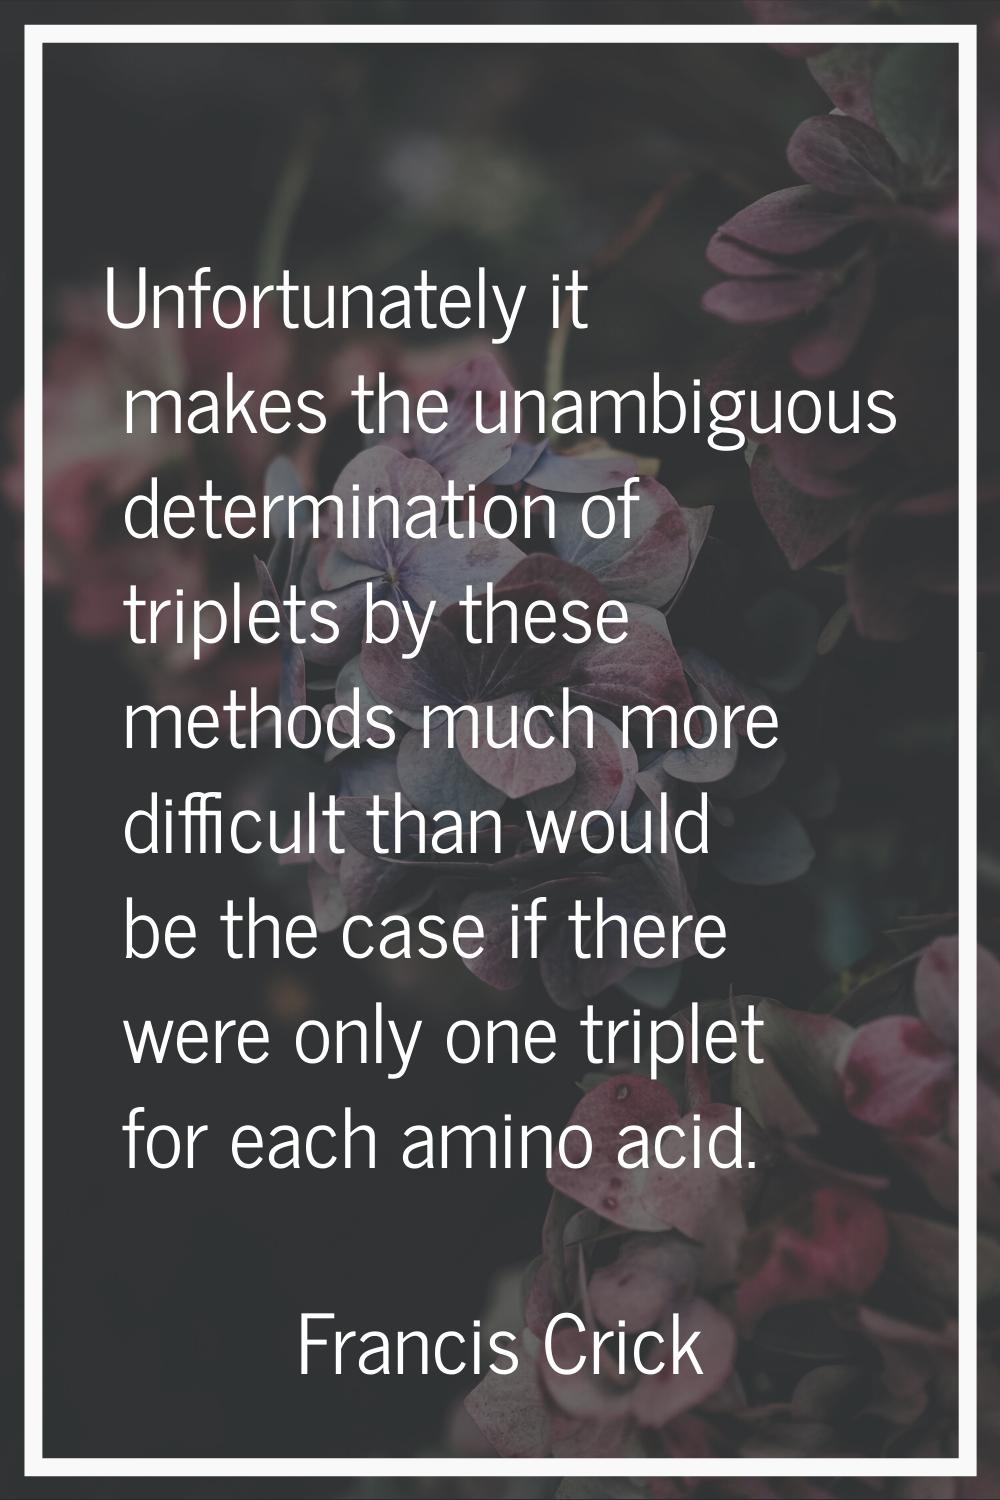 Unfortunately it makes the unambiguous determination of triplets by these methods much more difficu